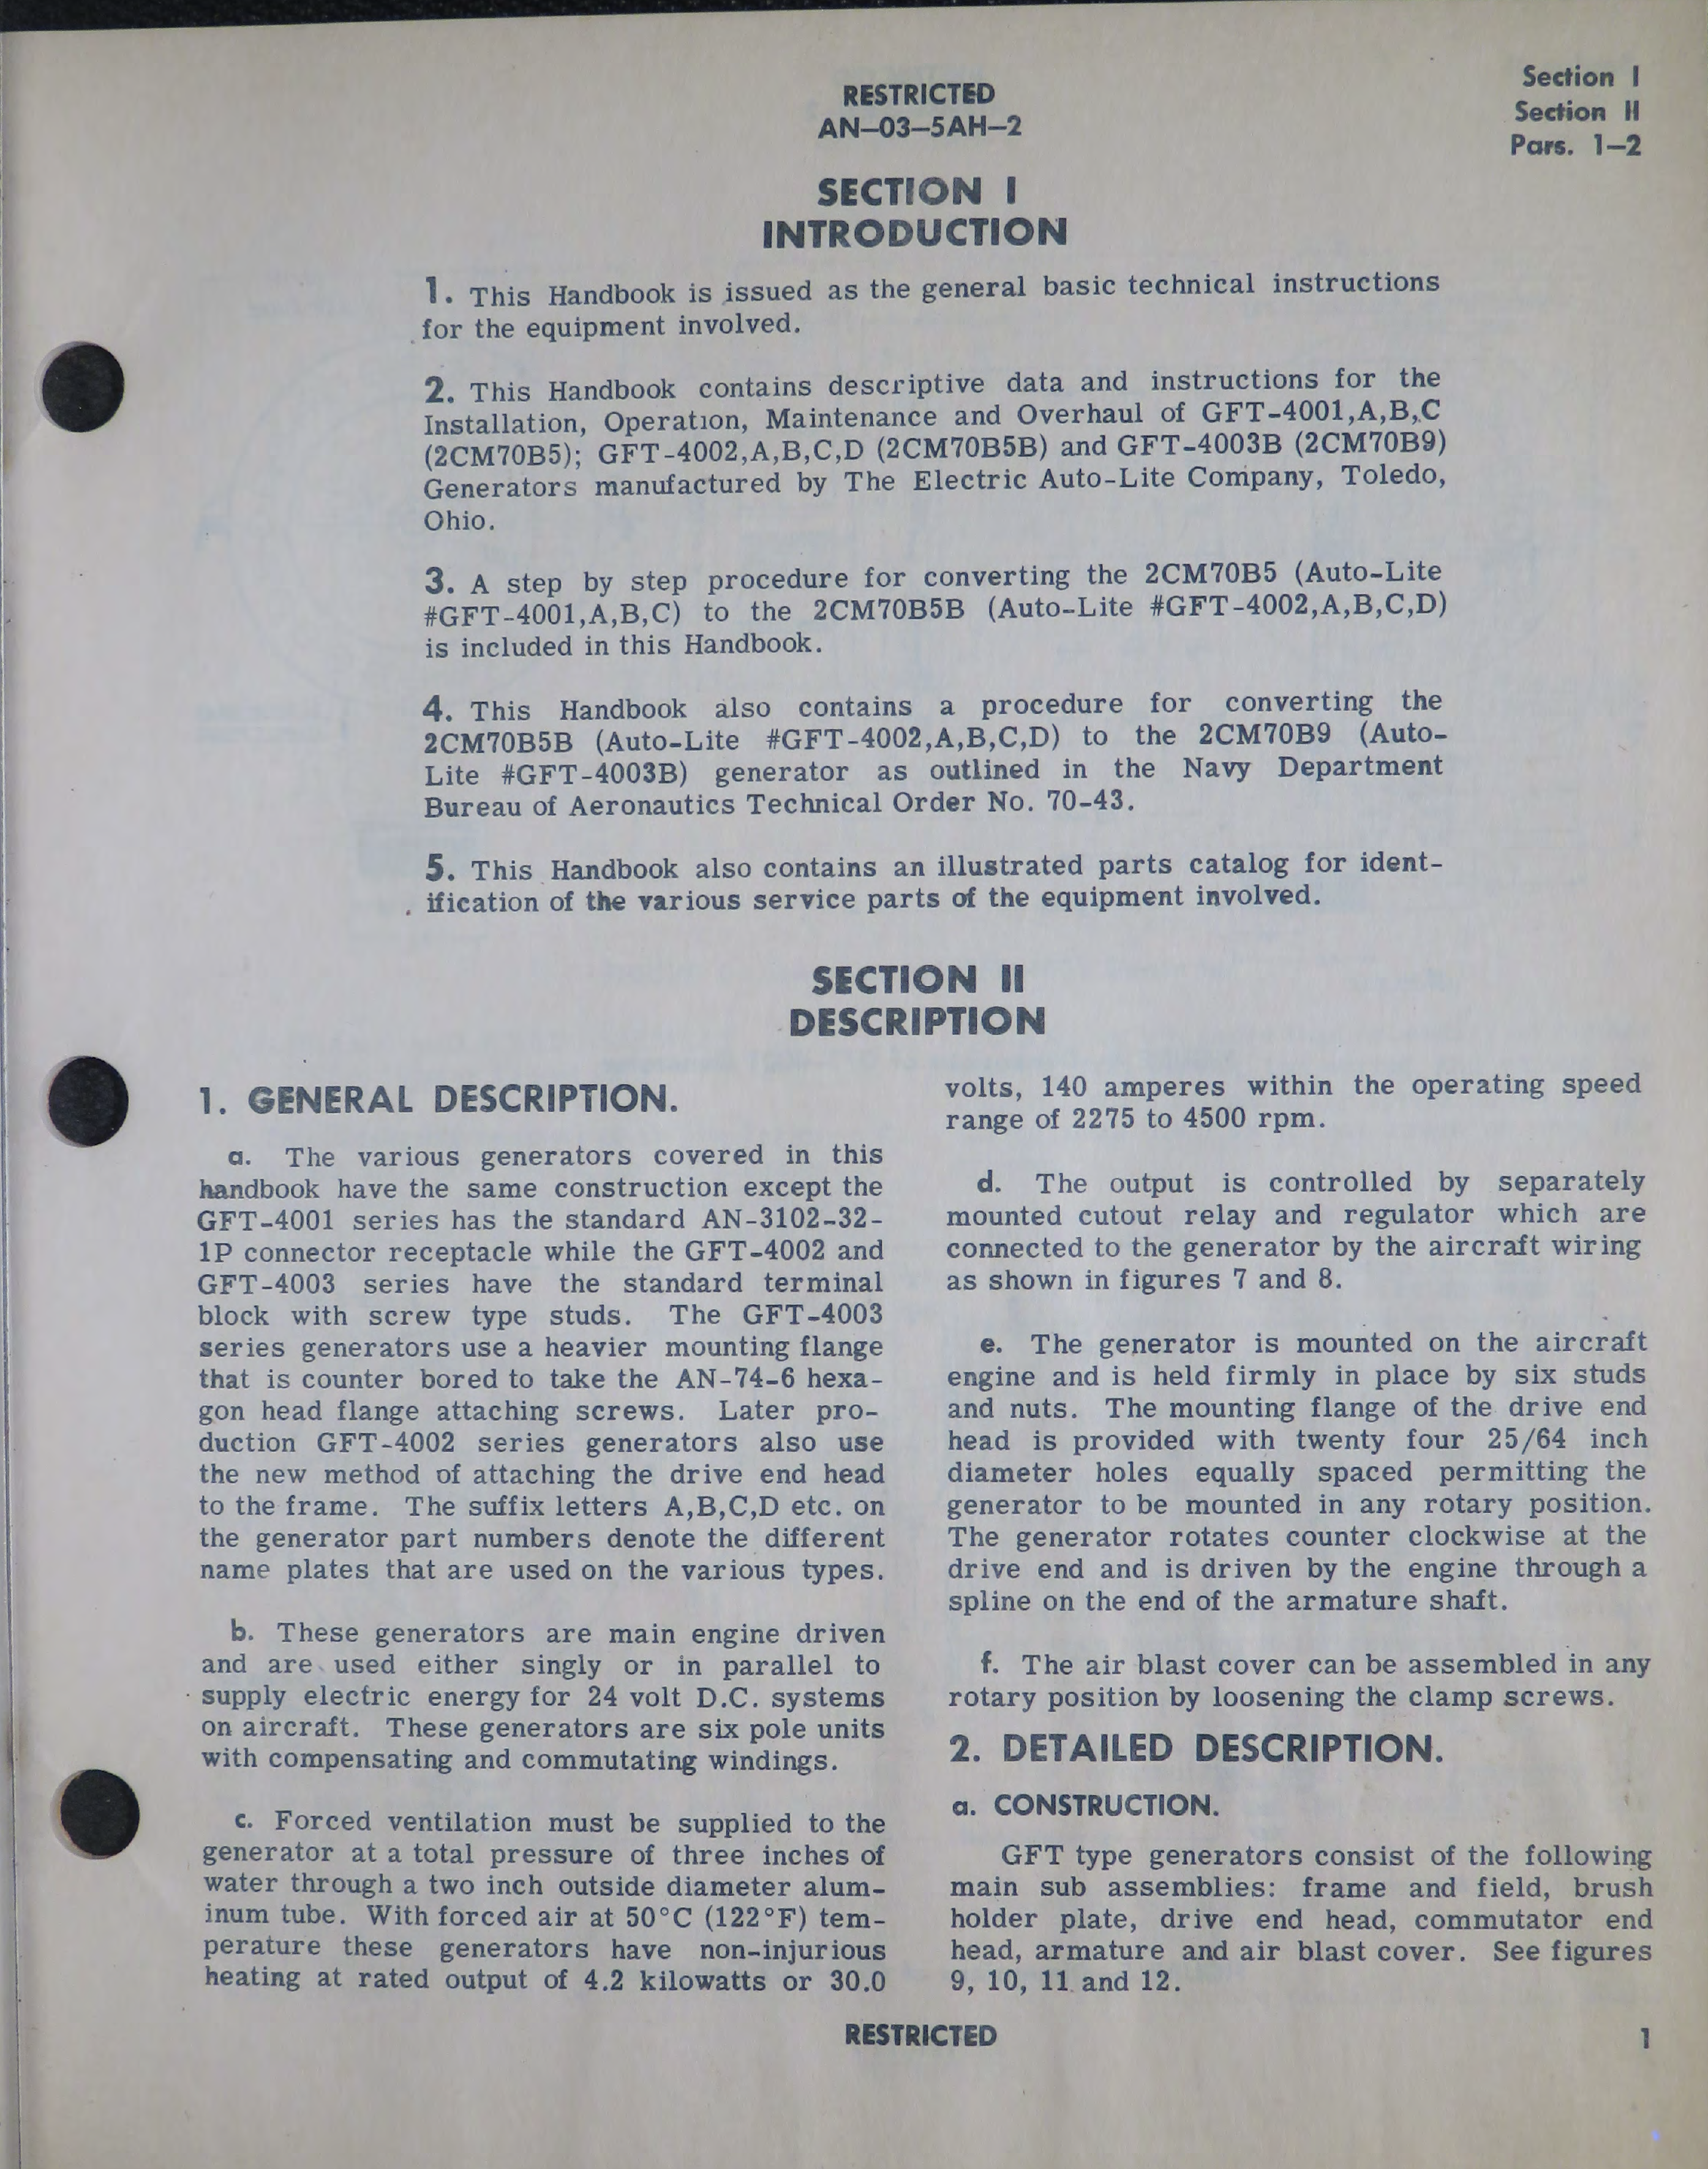 Sample page 7 from AirCorps Library document: Handbook of Instructions with Parts Catalog for Main Engine Driven Generators